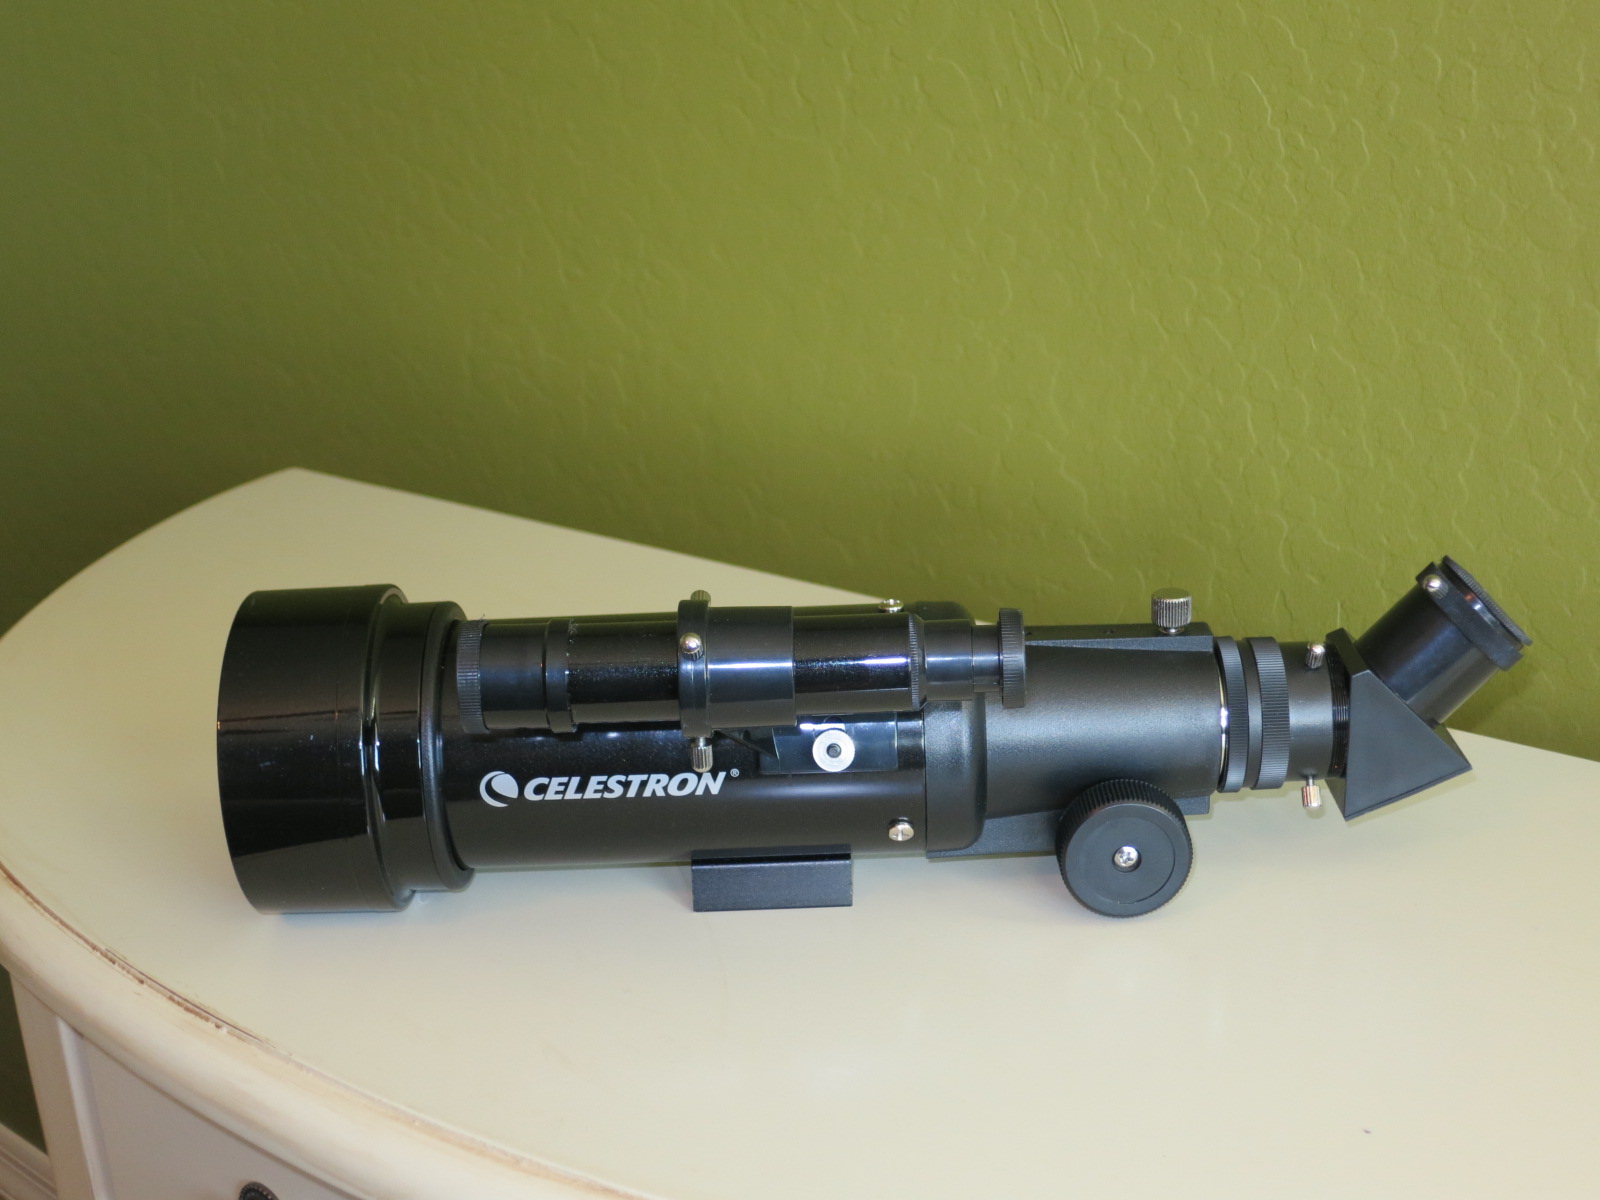 Celestron Travel Scope 70mm CN Classifieds Cloudy Nights